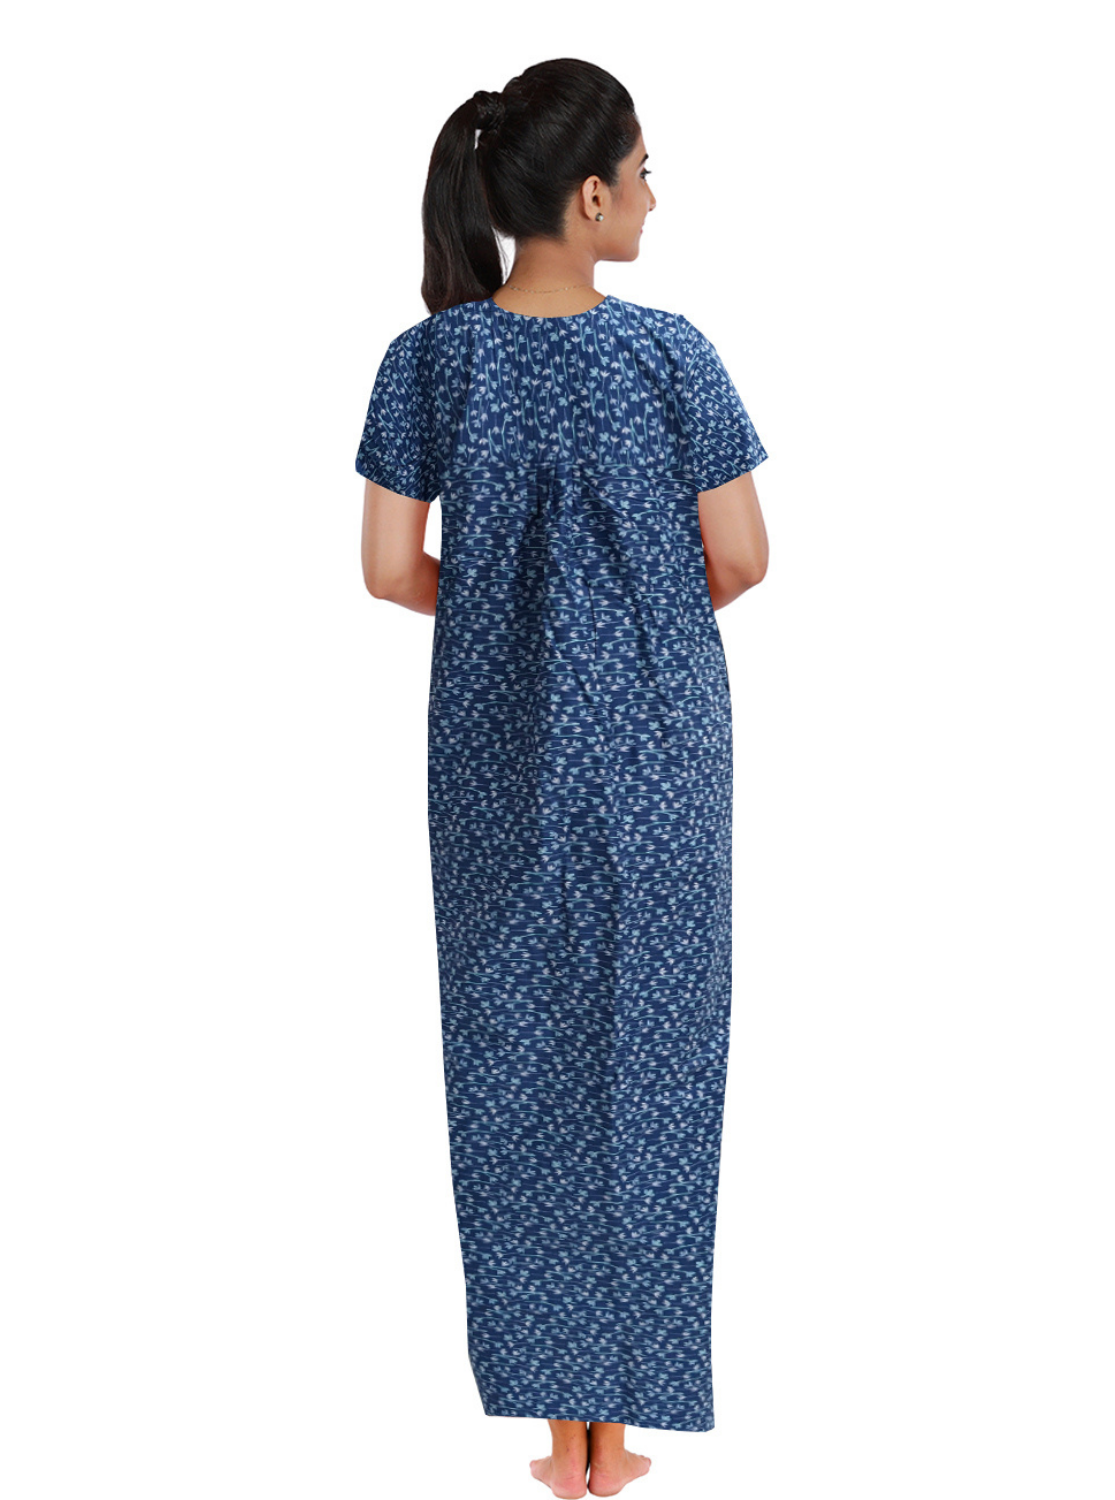 MANGAI Cotton PLEATED Model 3XL Size Nighties - Fancy Neck | With Side Pocket |Shrinkage Free Nighties | Trendy Collection's for Trendy Women's